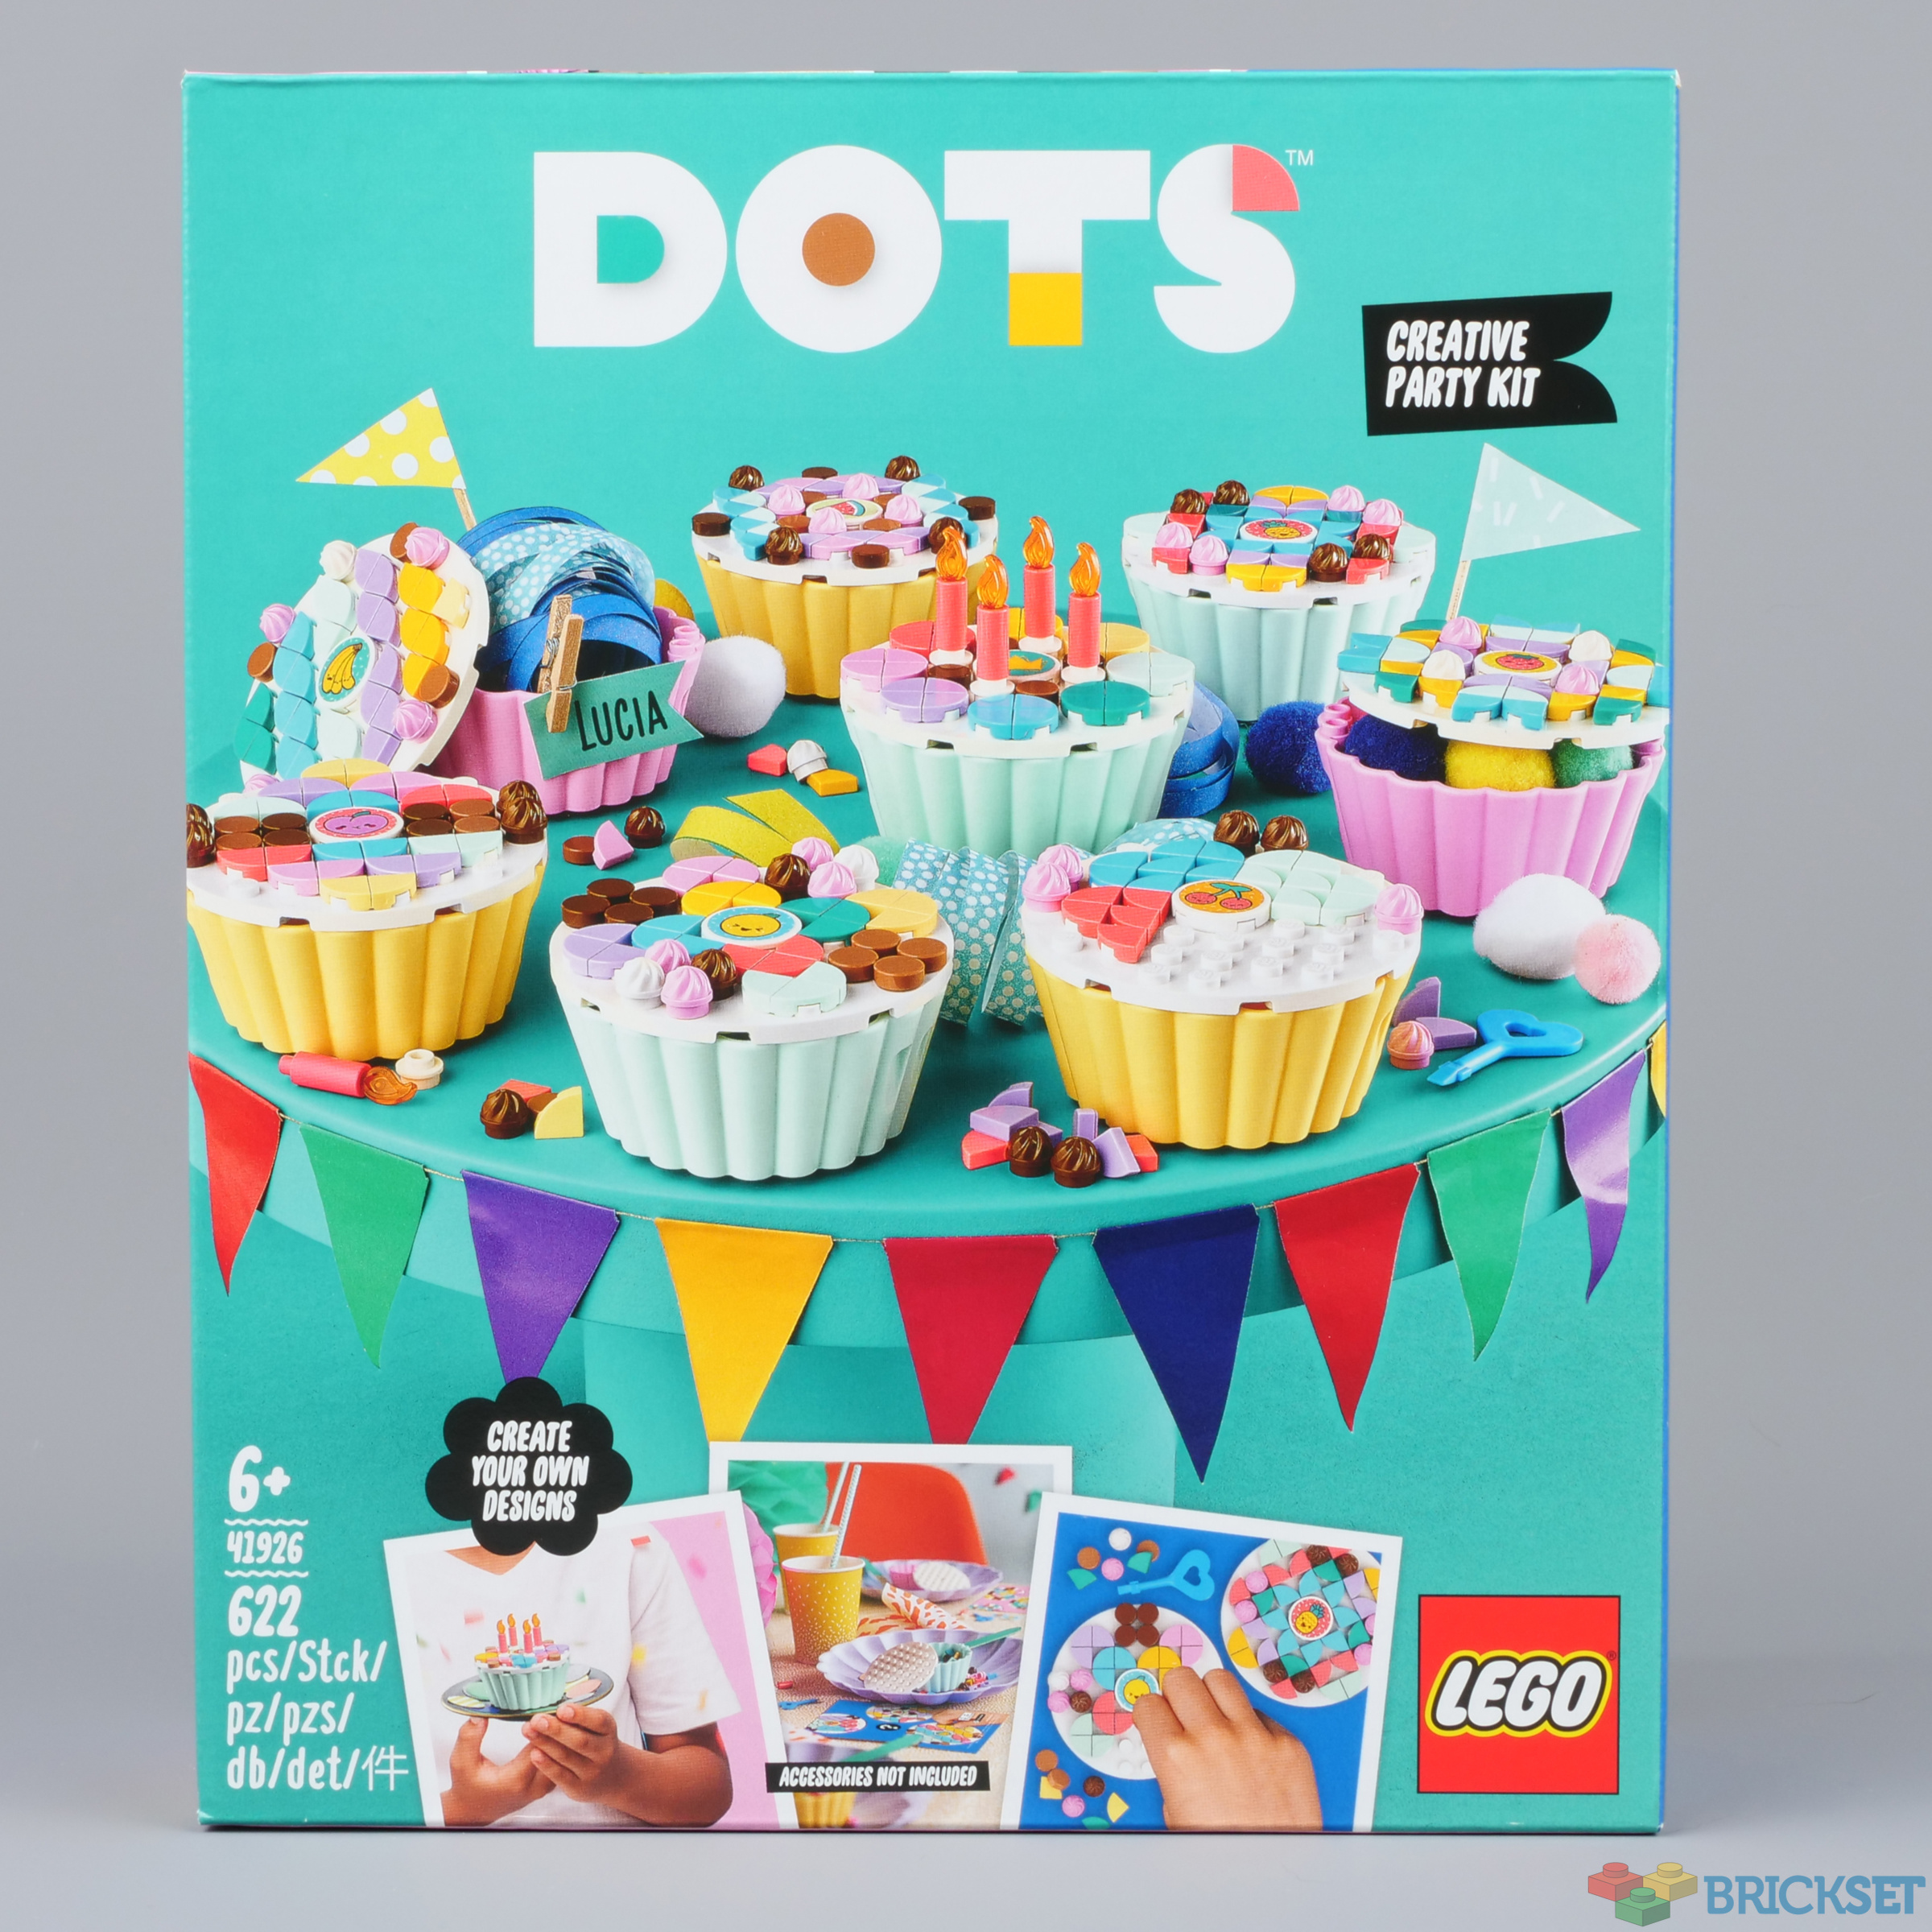 Details about   LEGO DOTS 41926 Creative Party Kit DIY Craft Decorations Kit Kids Gift Set 